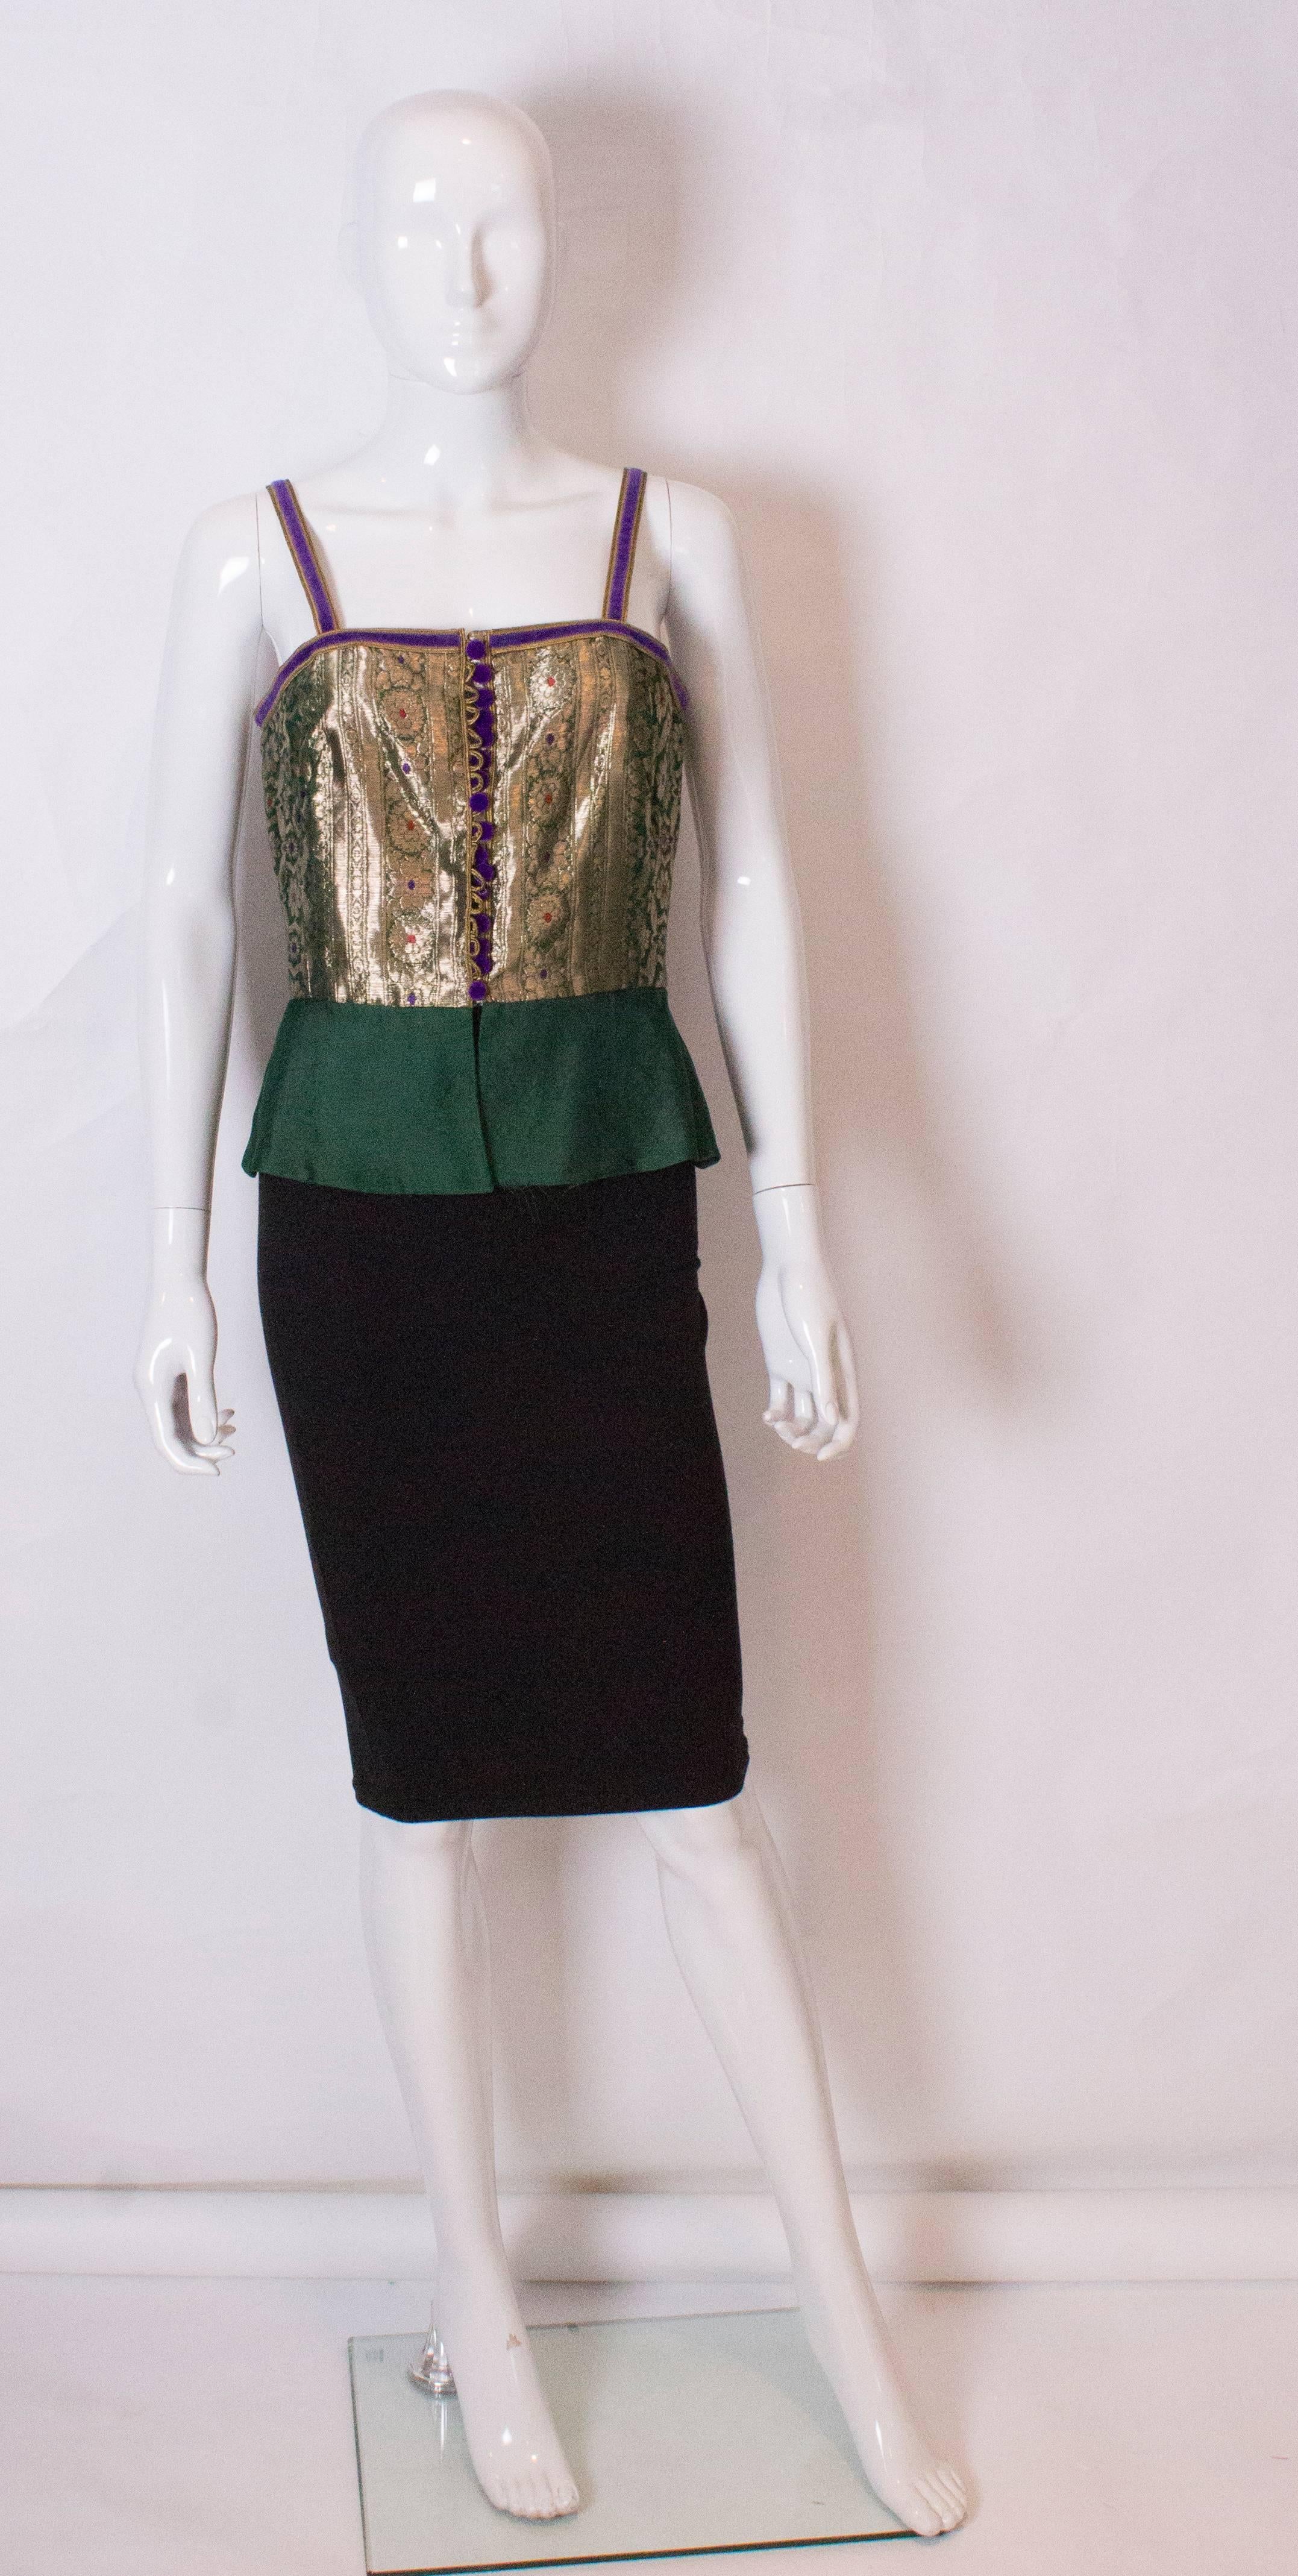 A chic vintage bodice by Regamus London. The body of the bodice is gold lame with a floral print and velvet trim, shoulder straps and buttons. It has a 5'' deep green peplum, and is fully lined.